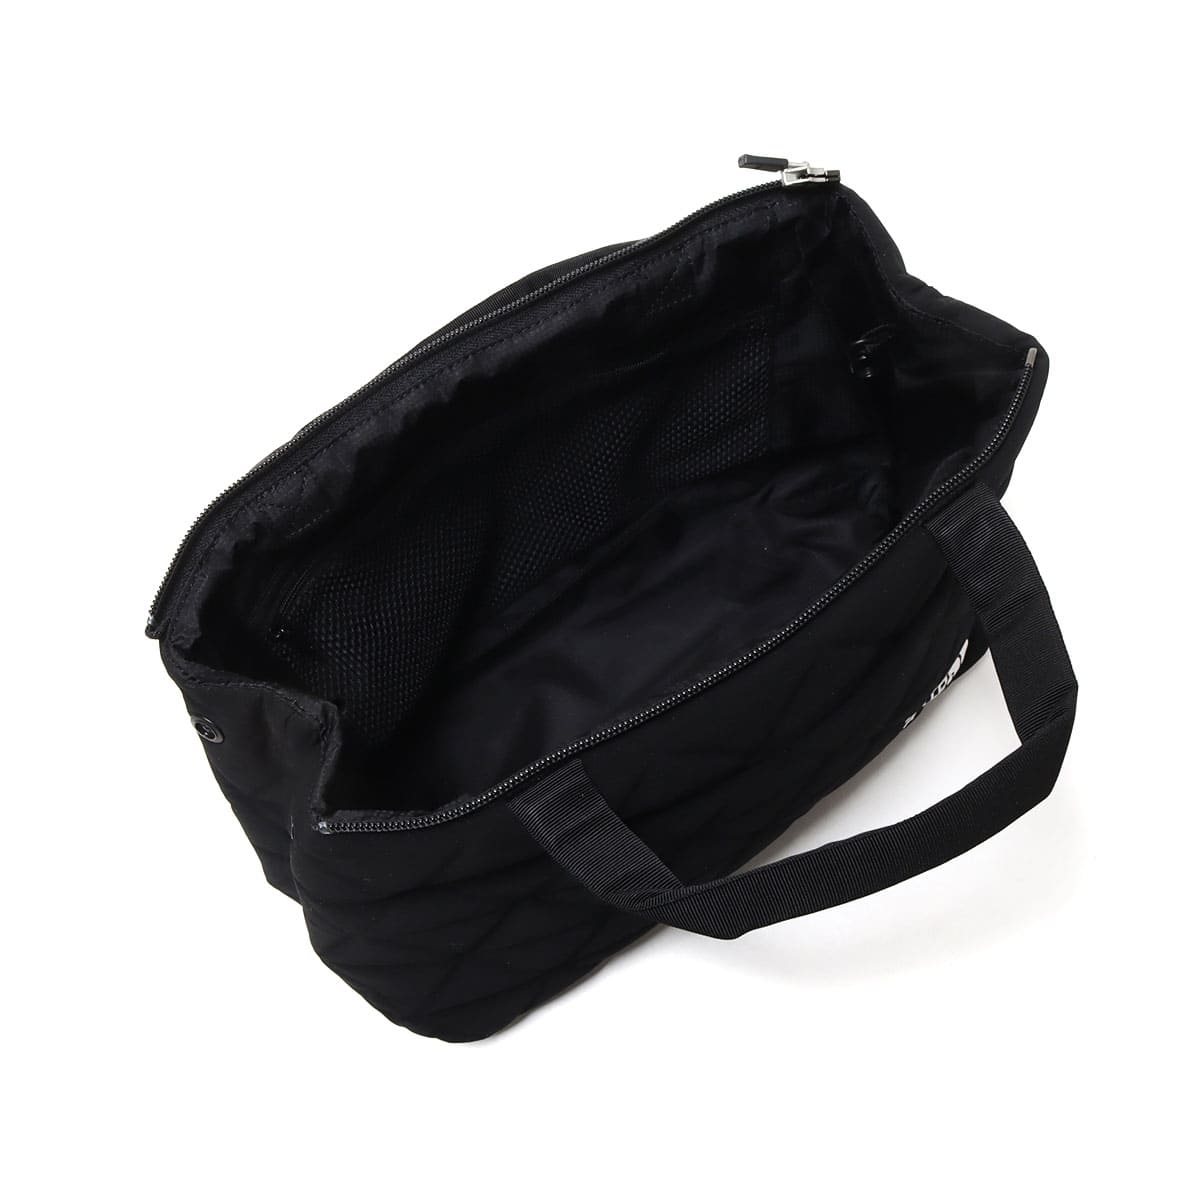 THE NORTH FACE GEOFACE BOX TOTE BLACK 22SS-I